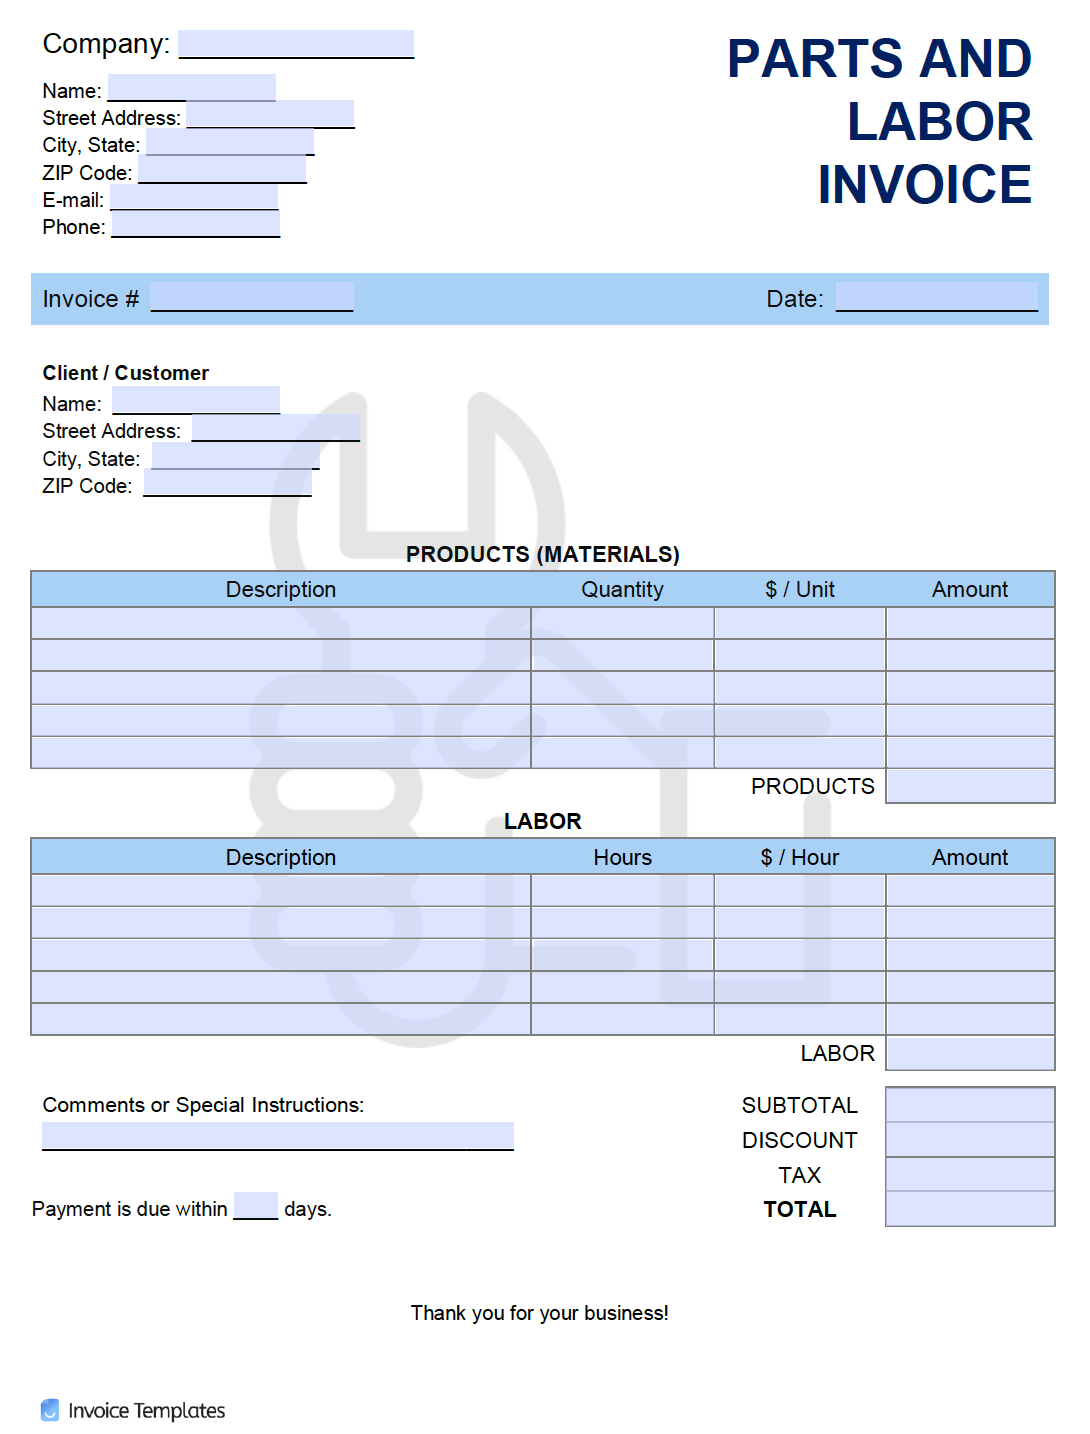 Free Parts and Labor Invoice Template  PDF  WORD  EXCEL Inside Labor Invoice Template Word